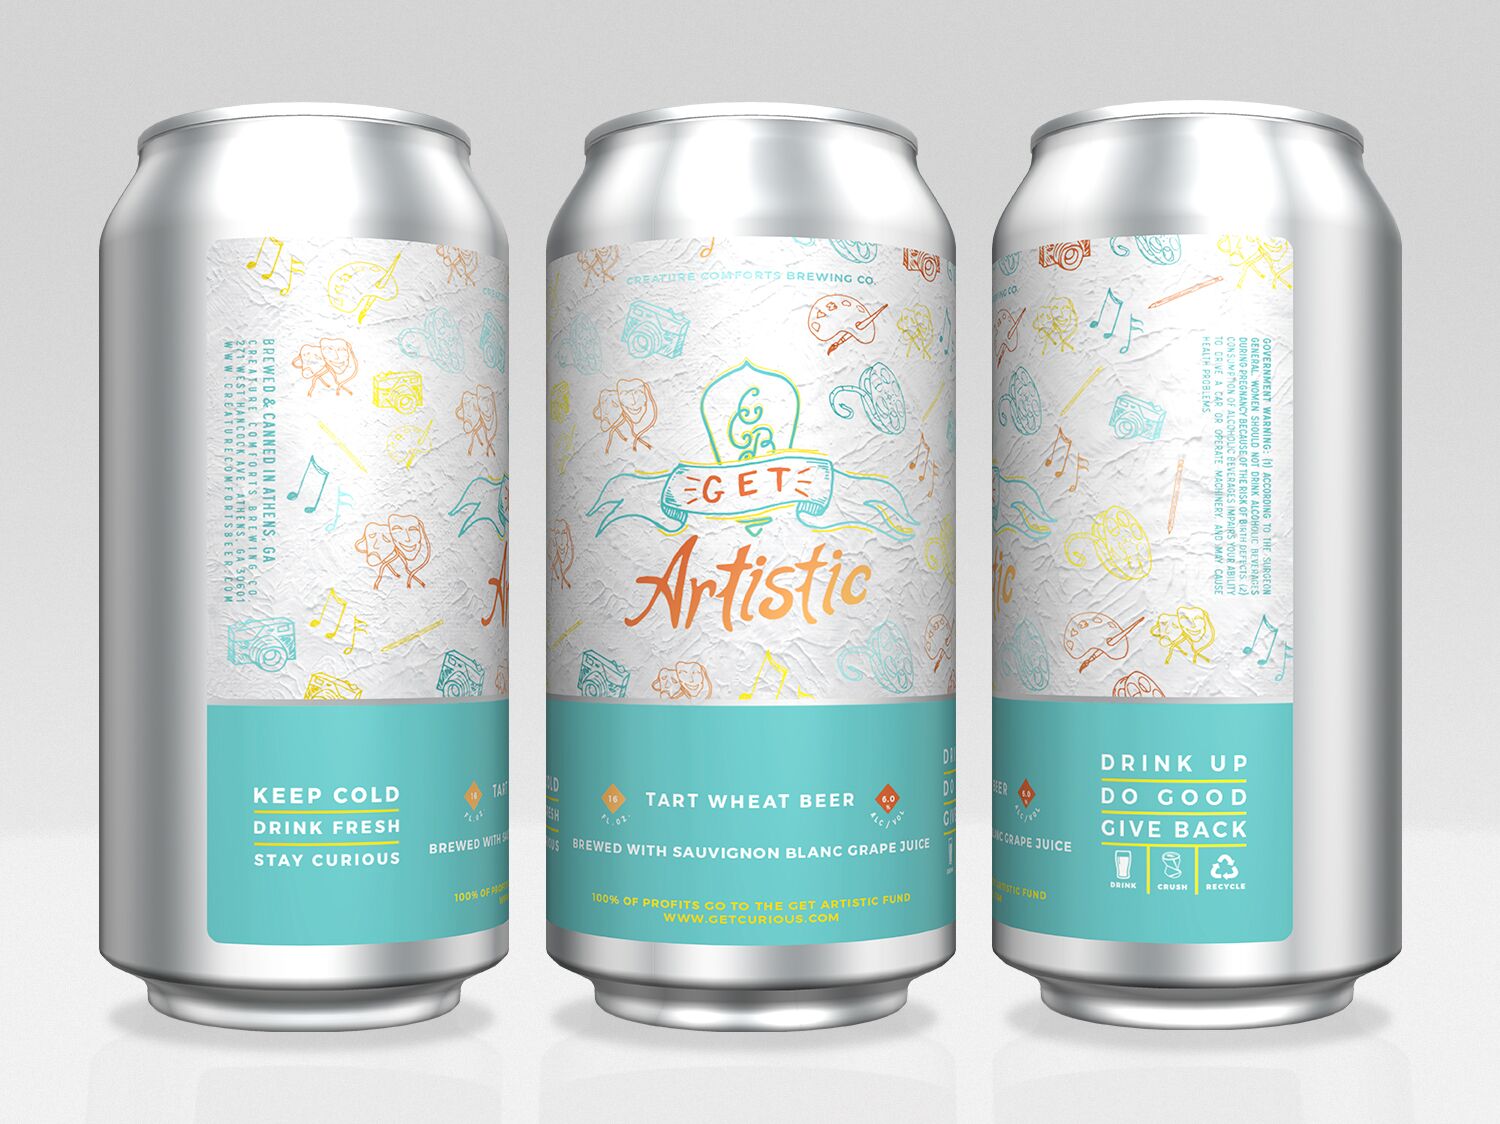 Creature Comforts Brewing Co. | Get Artistic Tart Wheat Beer